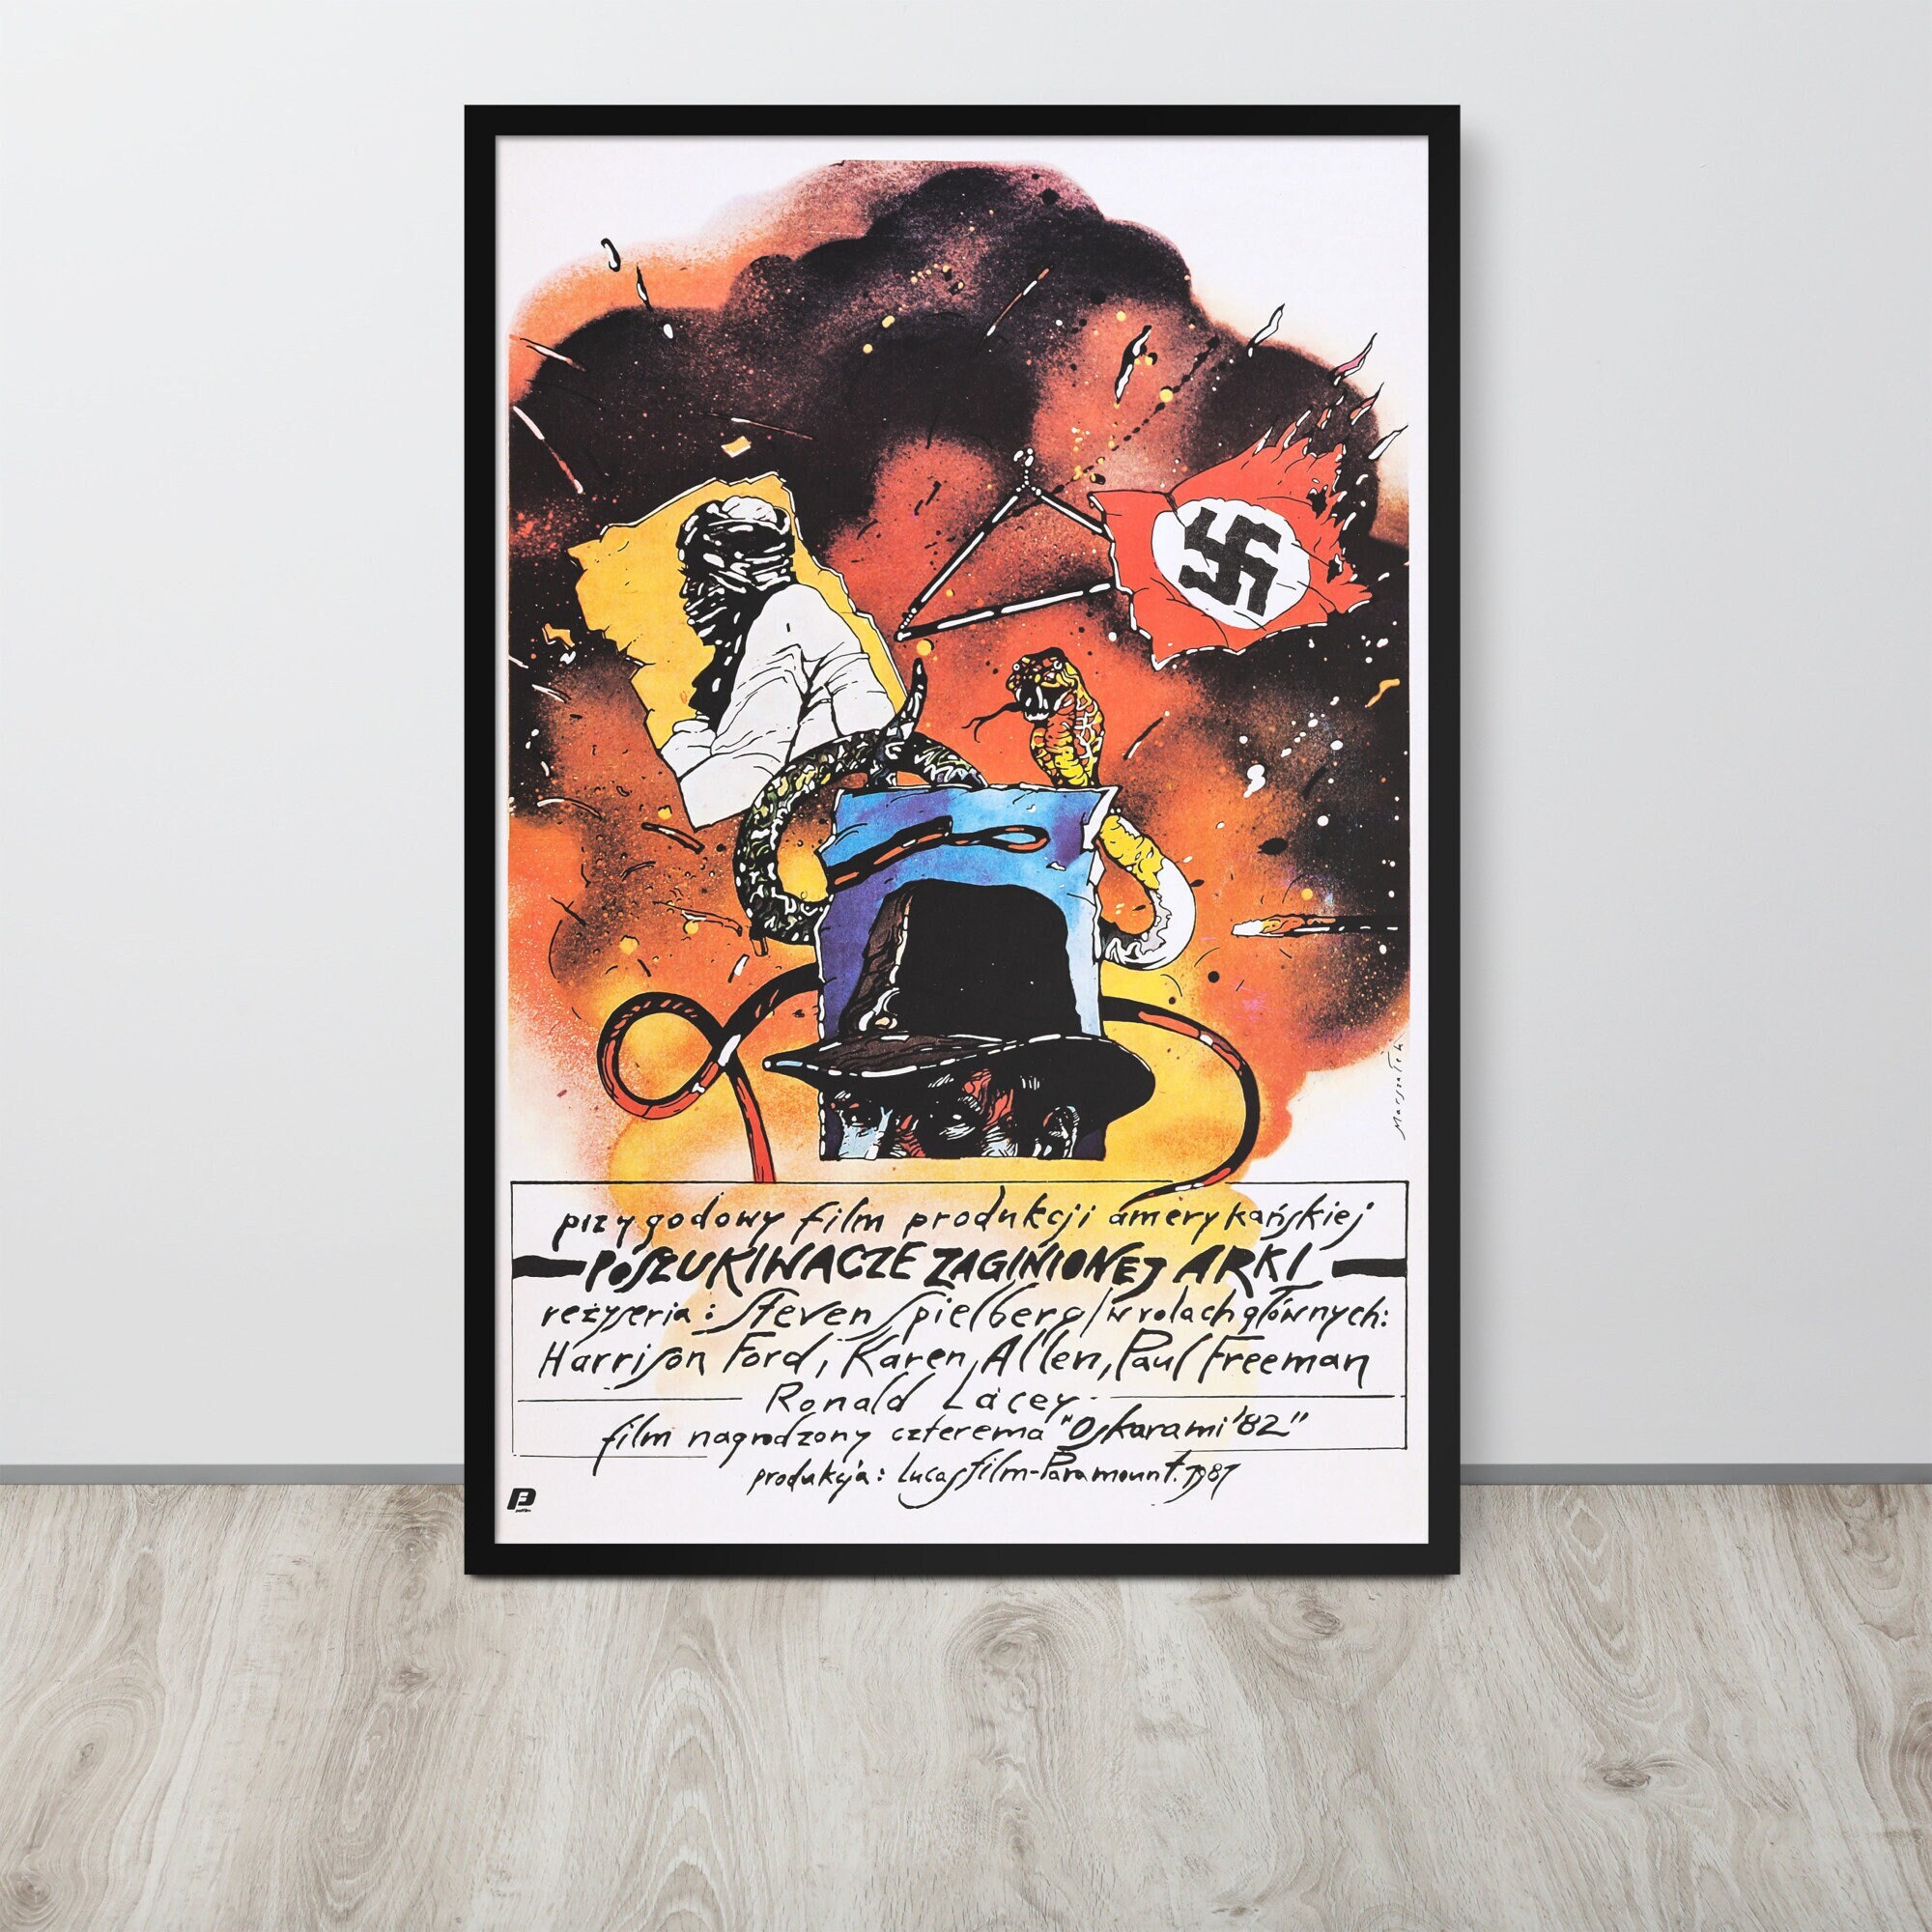 Science Fiction Posters Clash of The Titans 1981 Movie Posters (3) Canvas  Wall Art Prints for Wall Decor Room Decor Bedroom Decor Gifts Posters